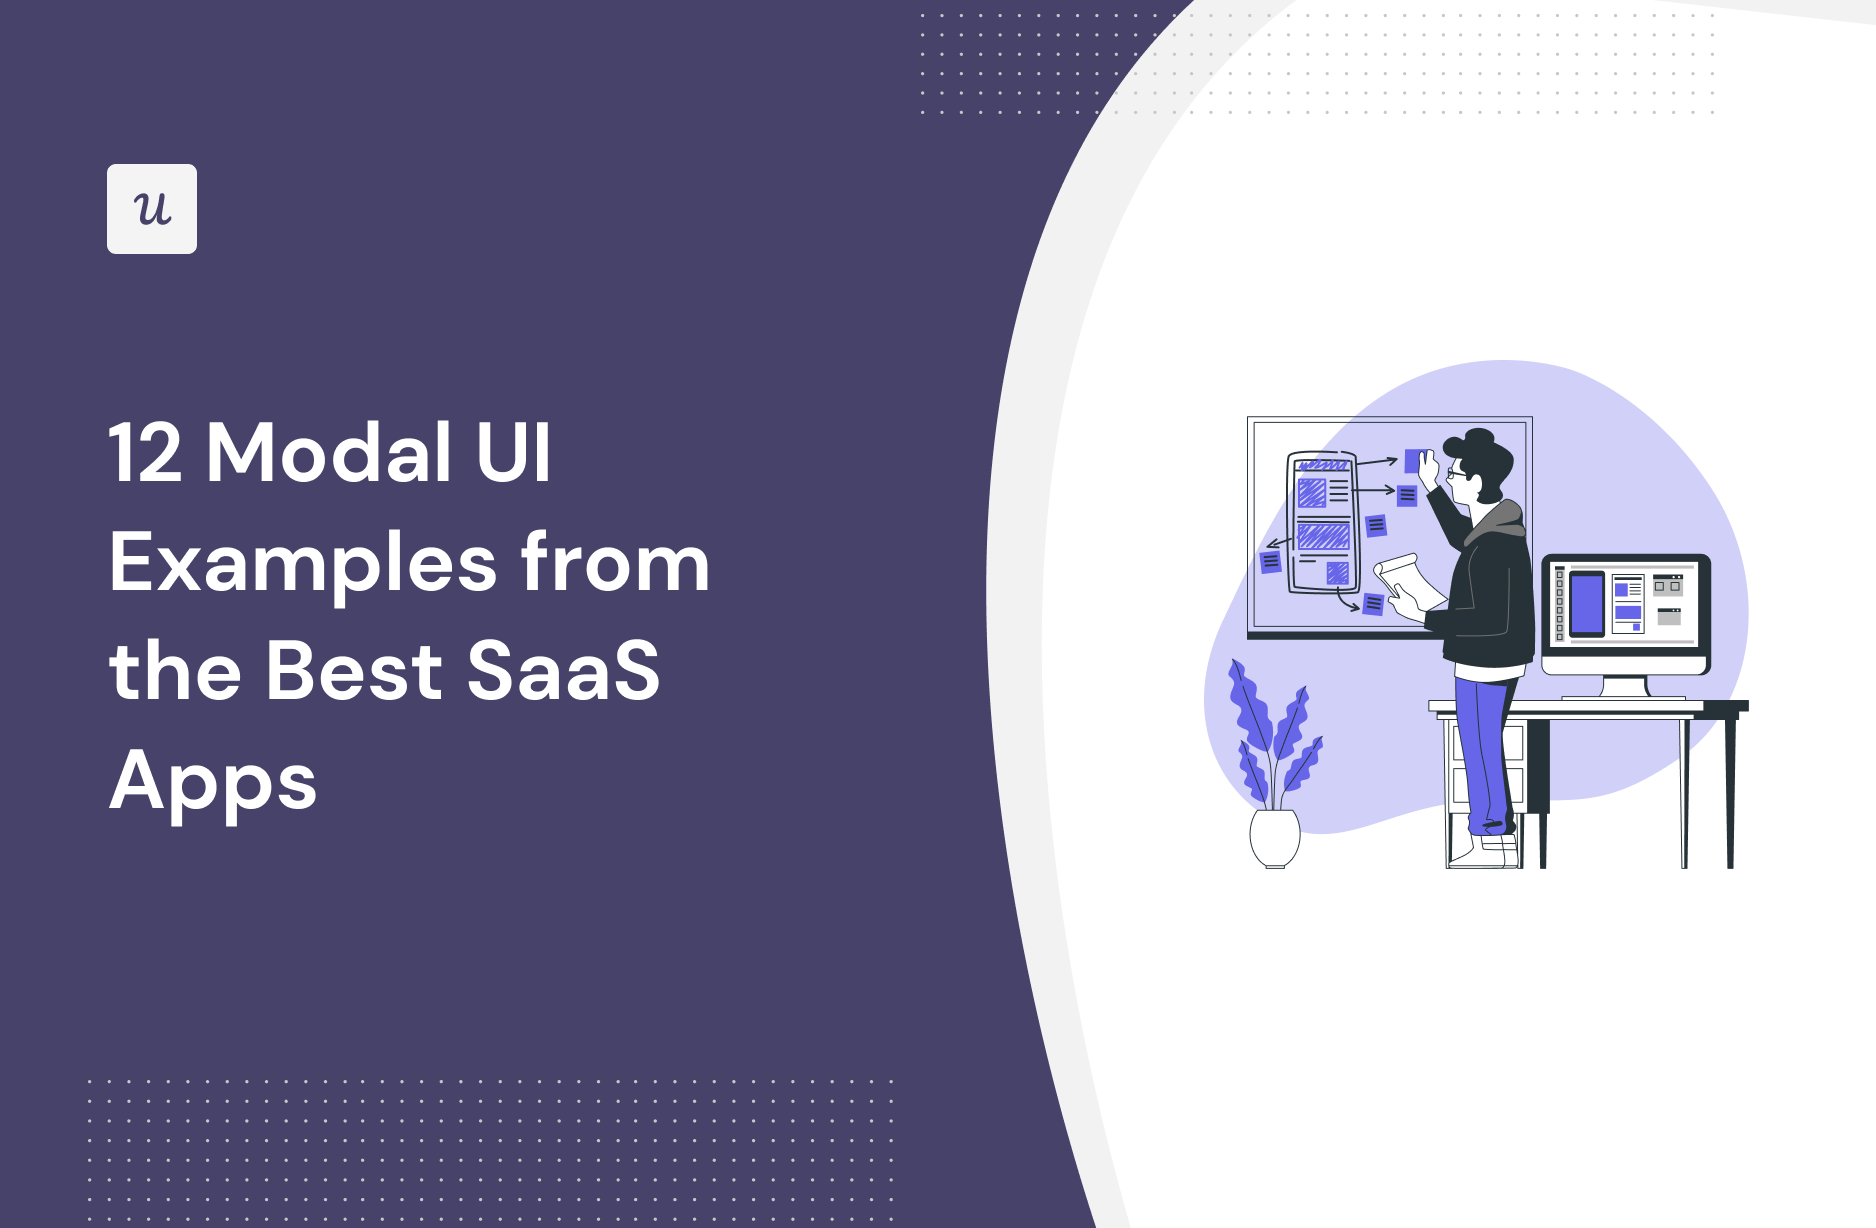 12 Modal UI Examples from the Best SaaS Apps